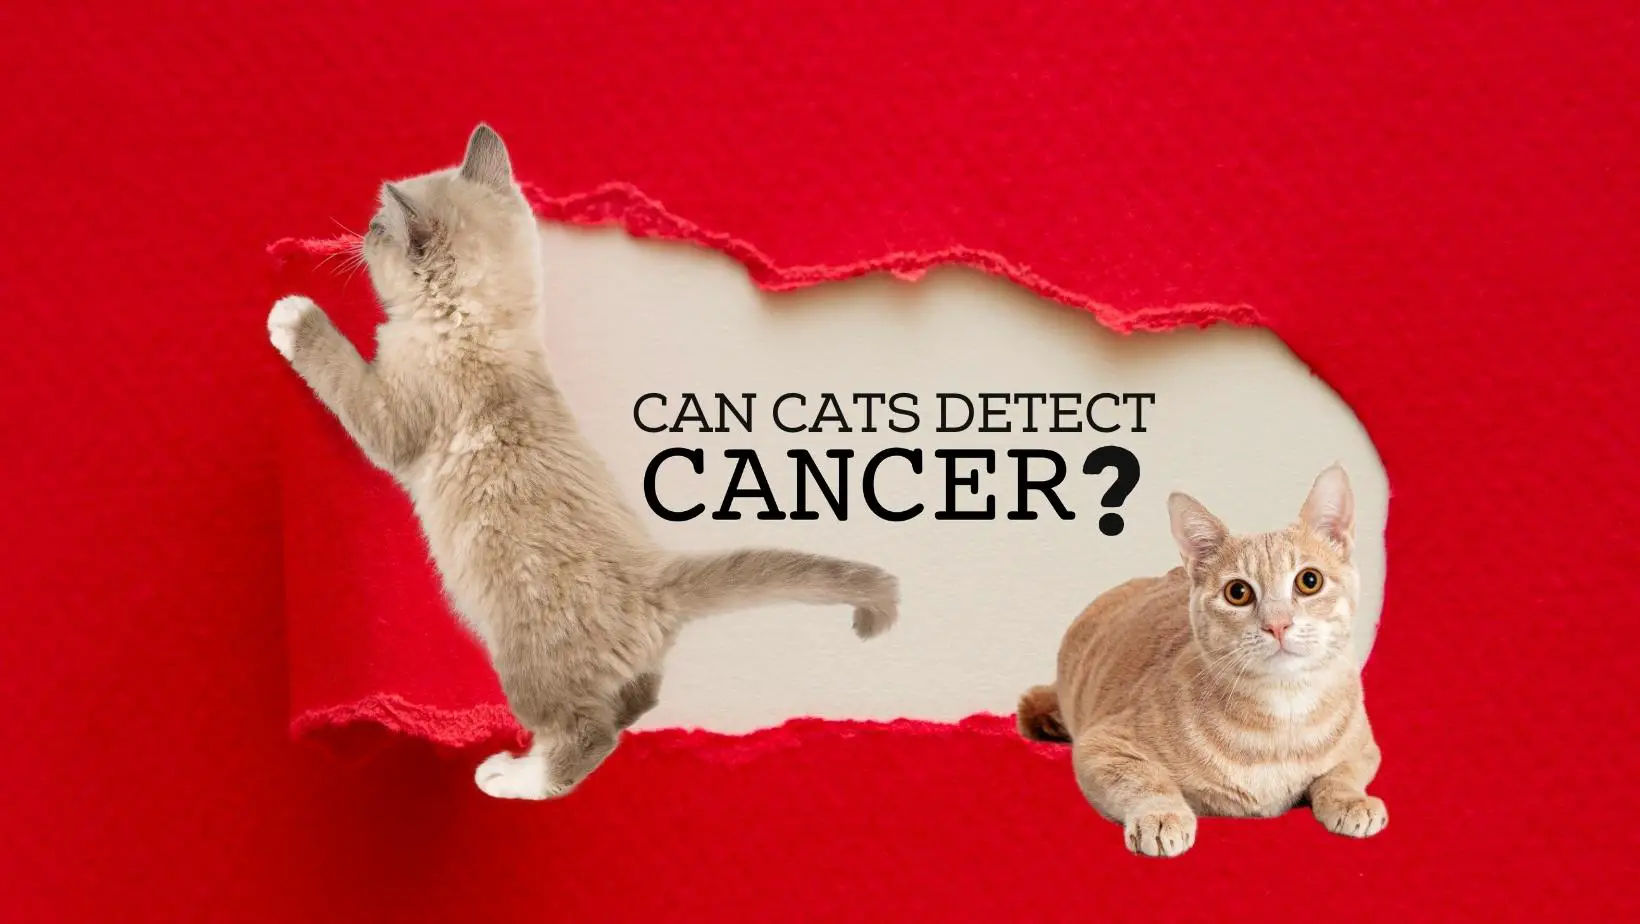 Can Cats Detect Cancer?